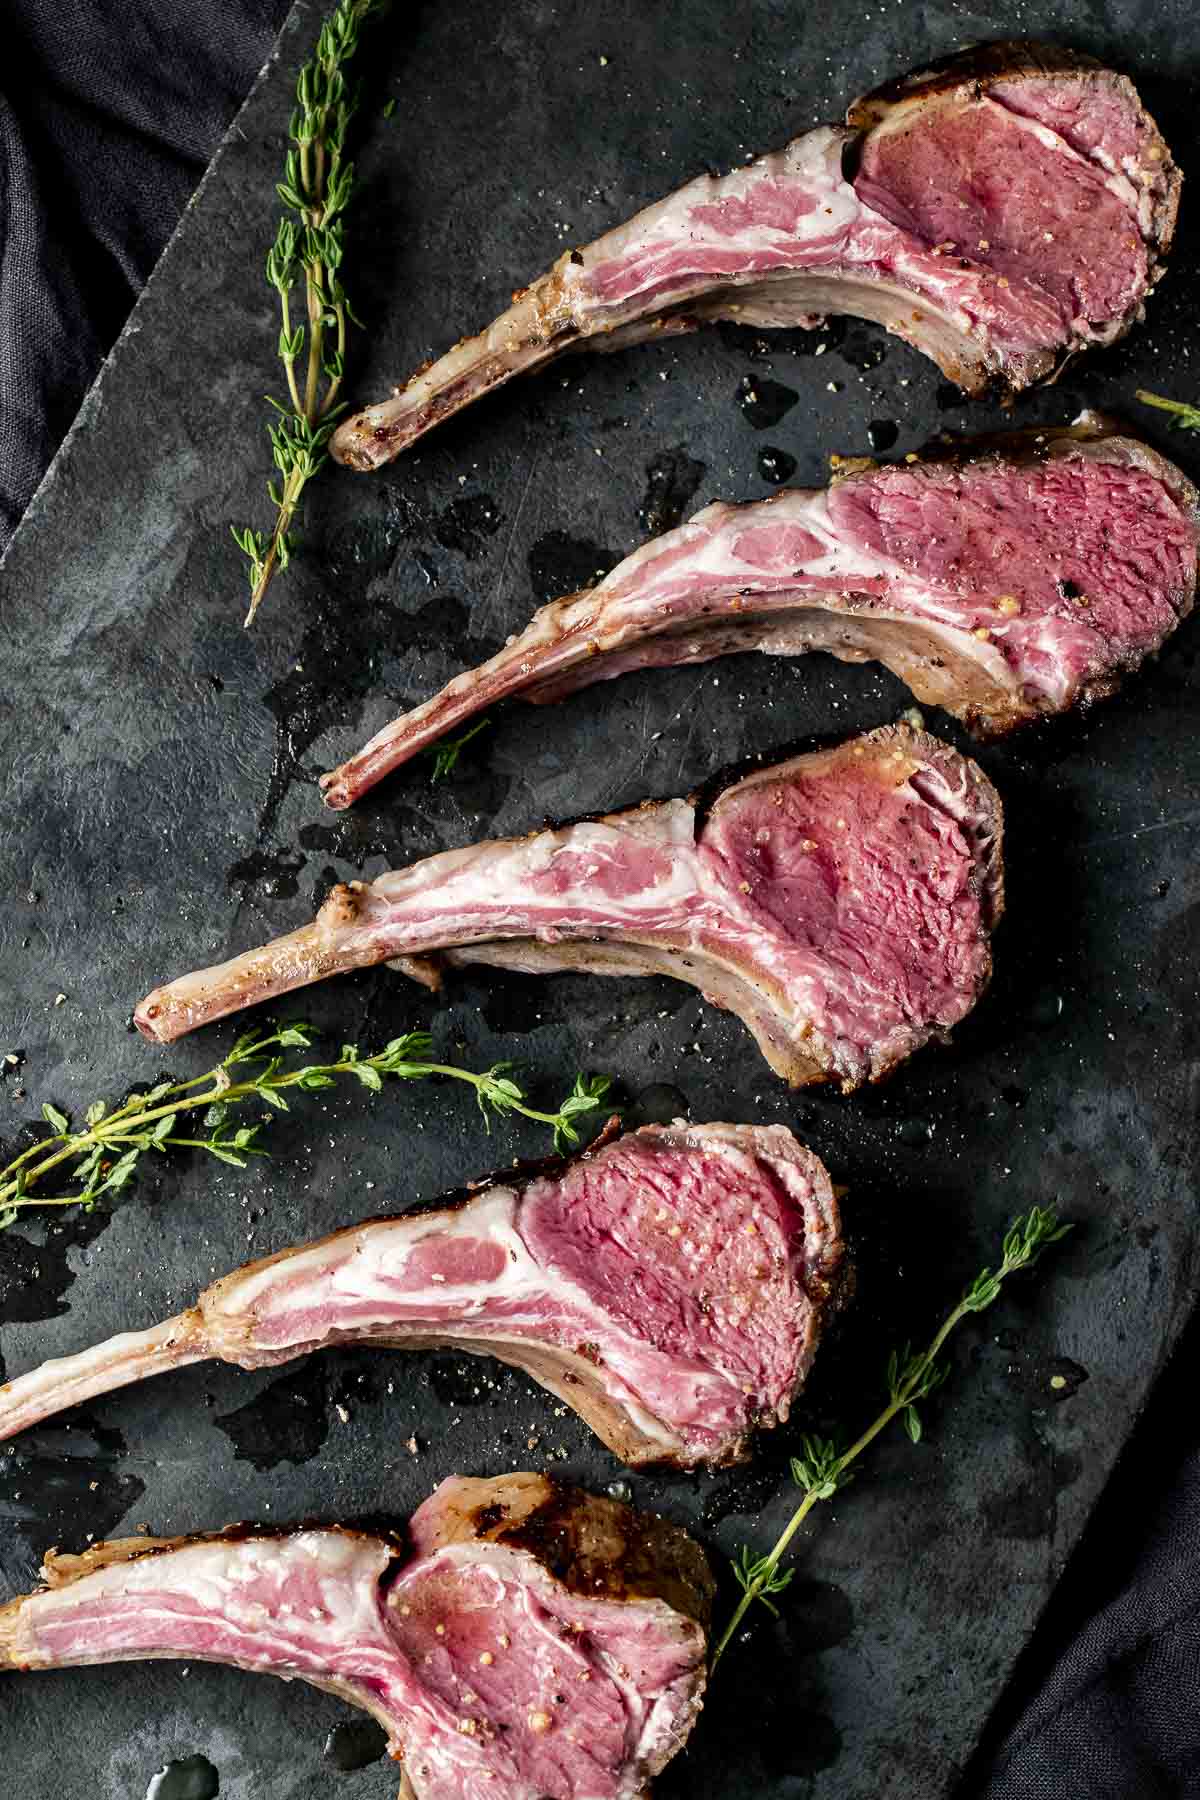 Overhead view of rack of lamb cut into chops and garnished with fresh herbs.